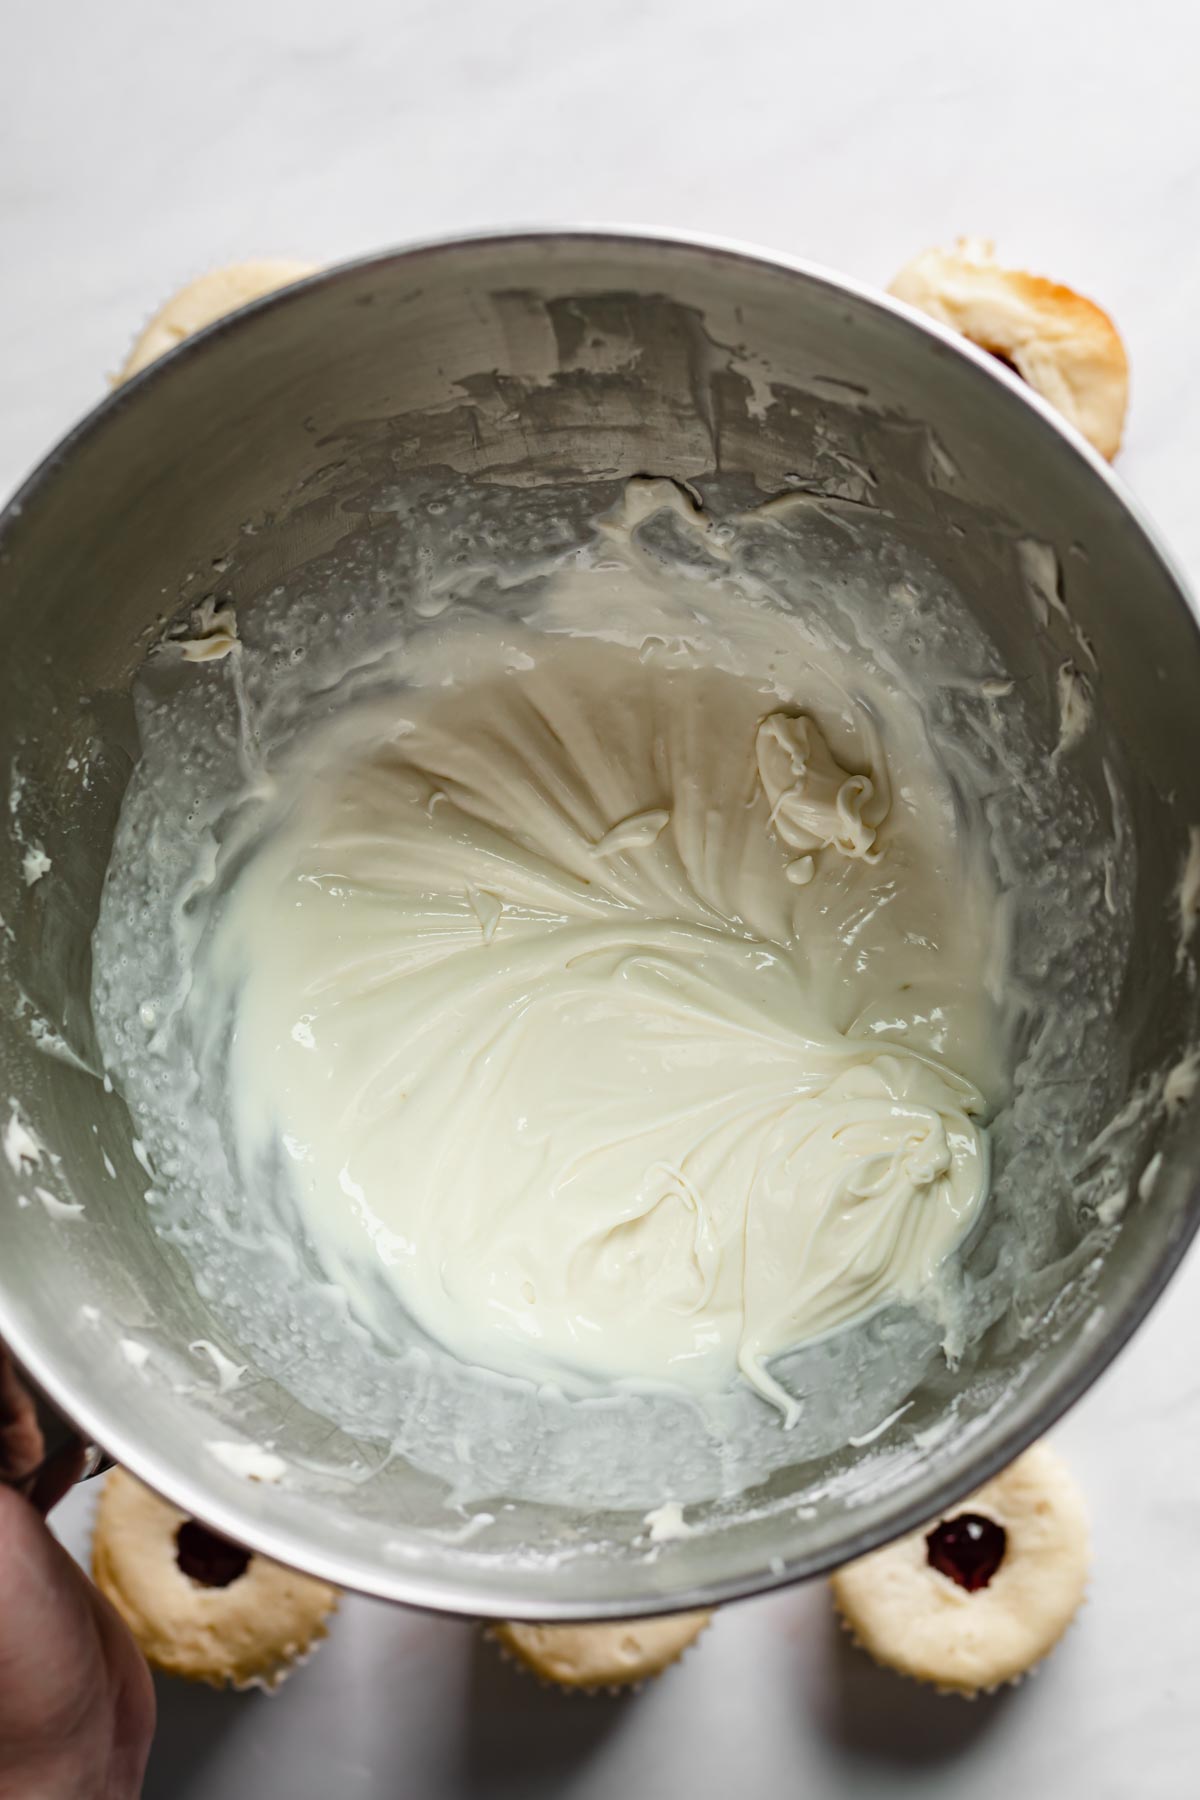 The cream cheese frosting mixture creamed.